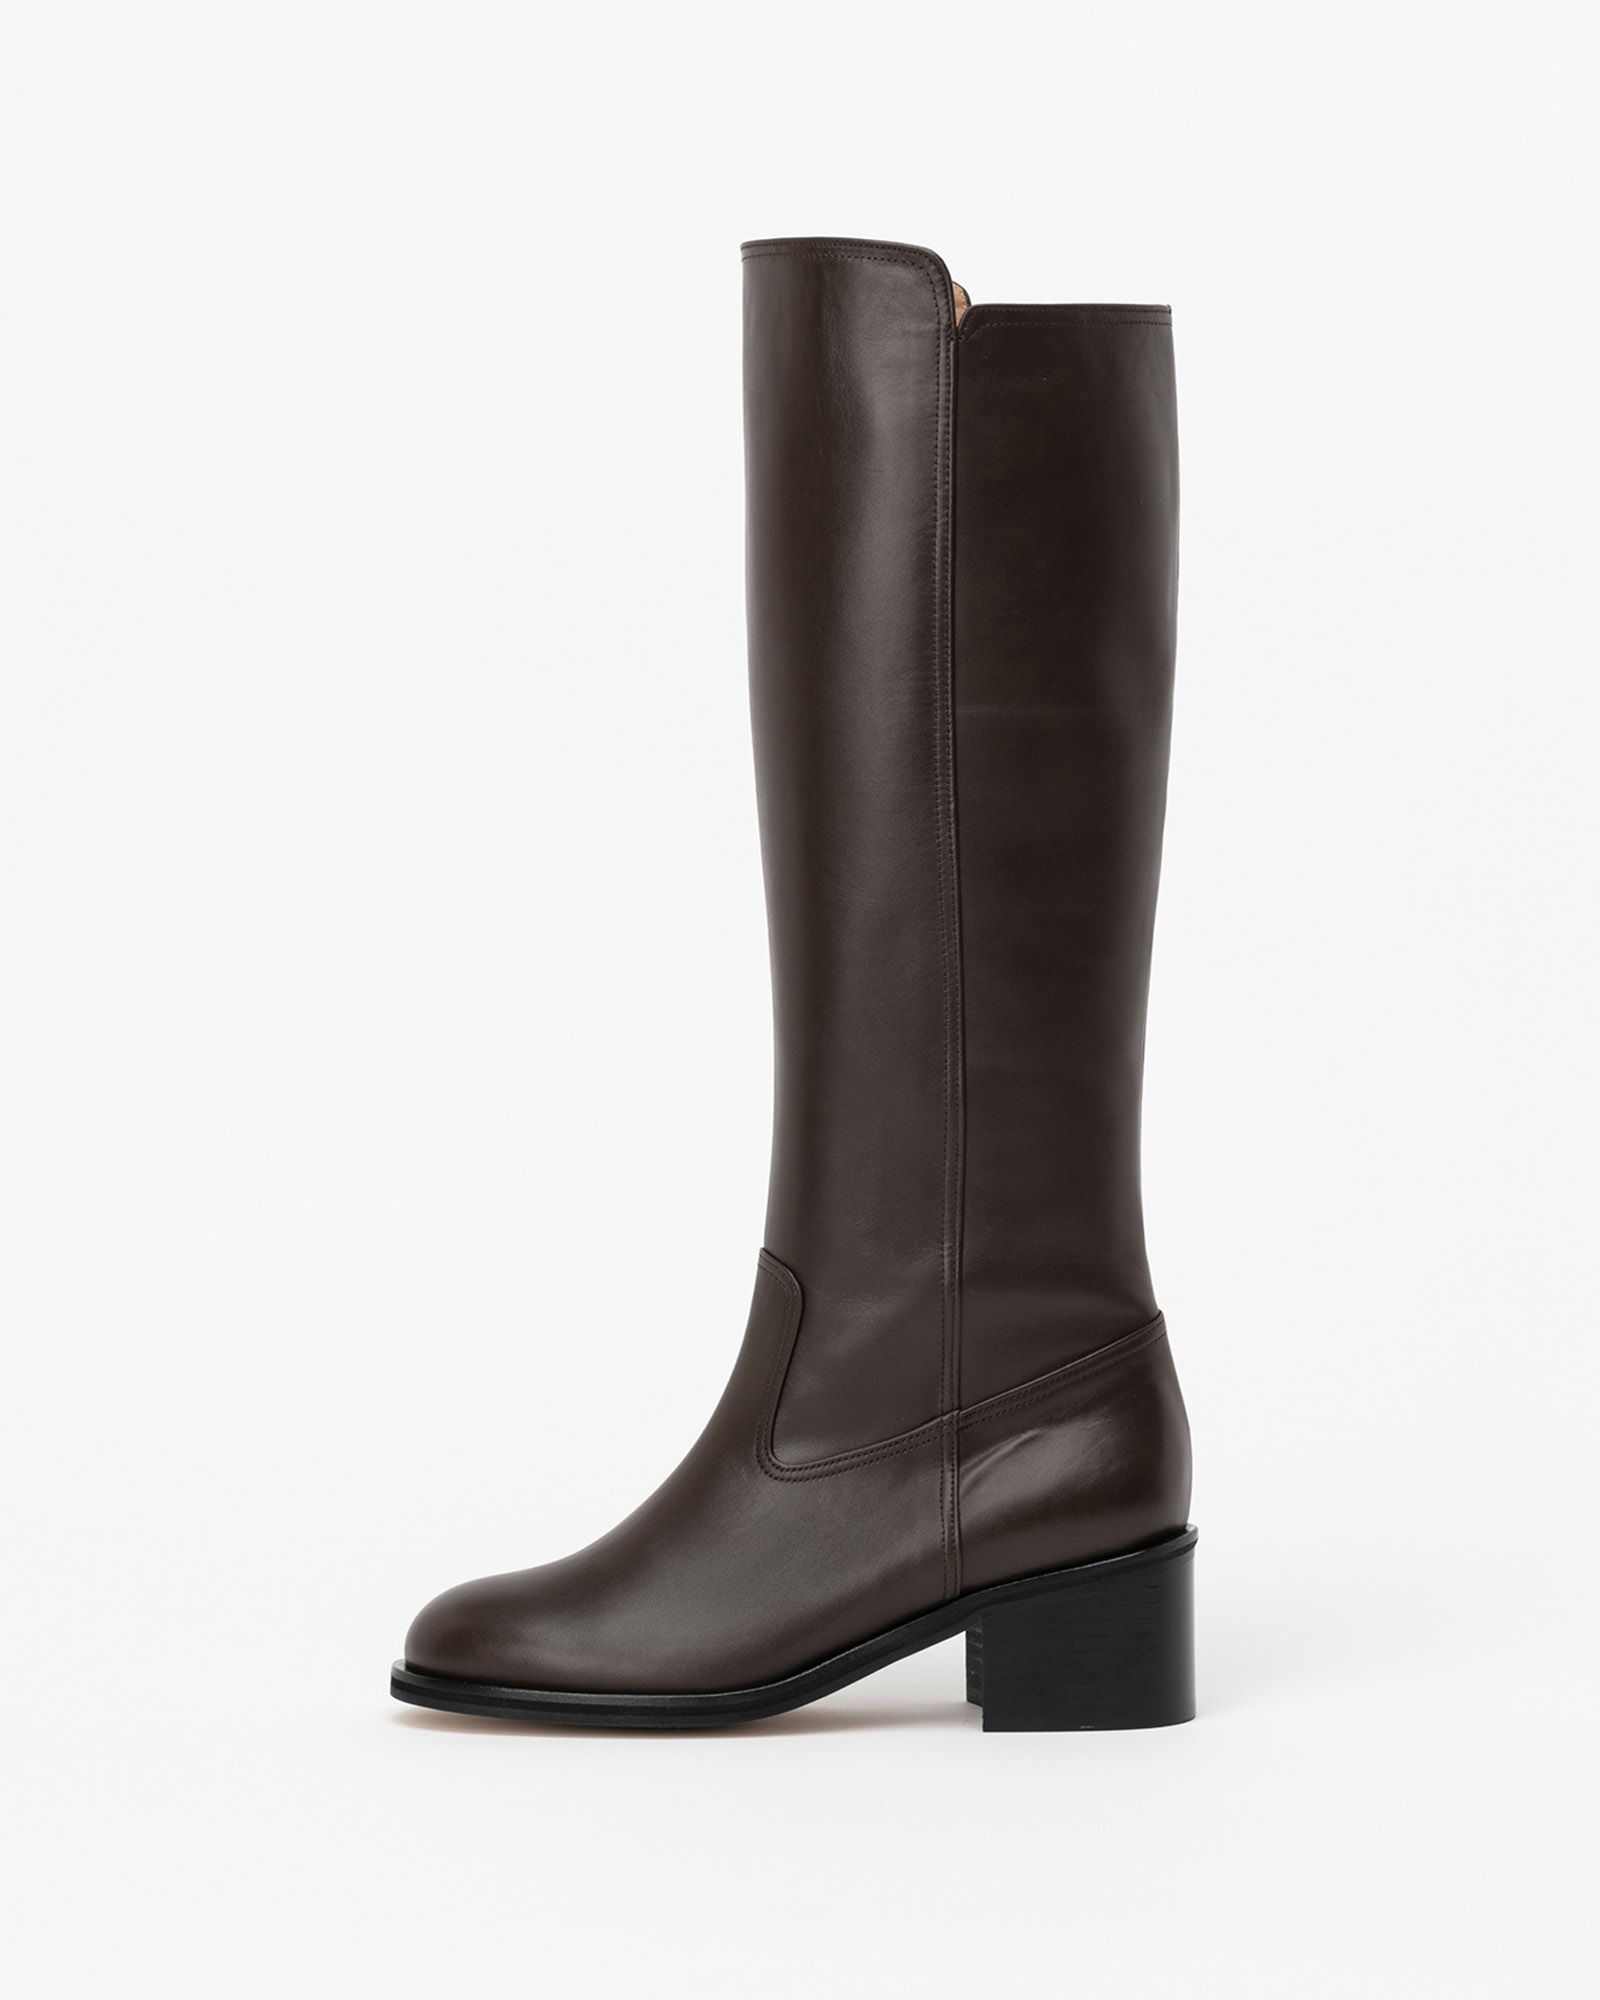 Velma Riding Boots in Roast Brown